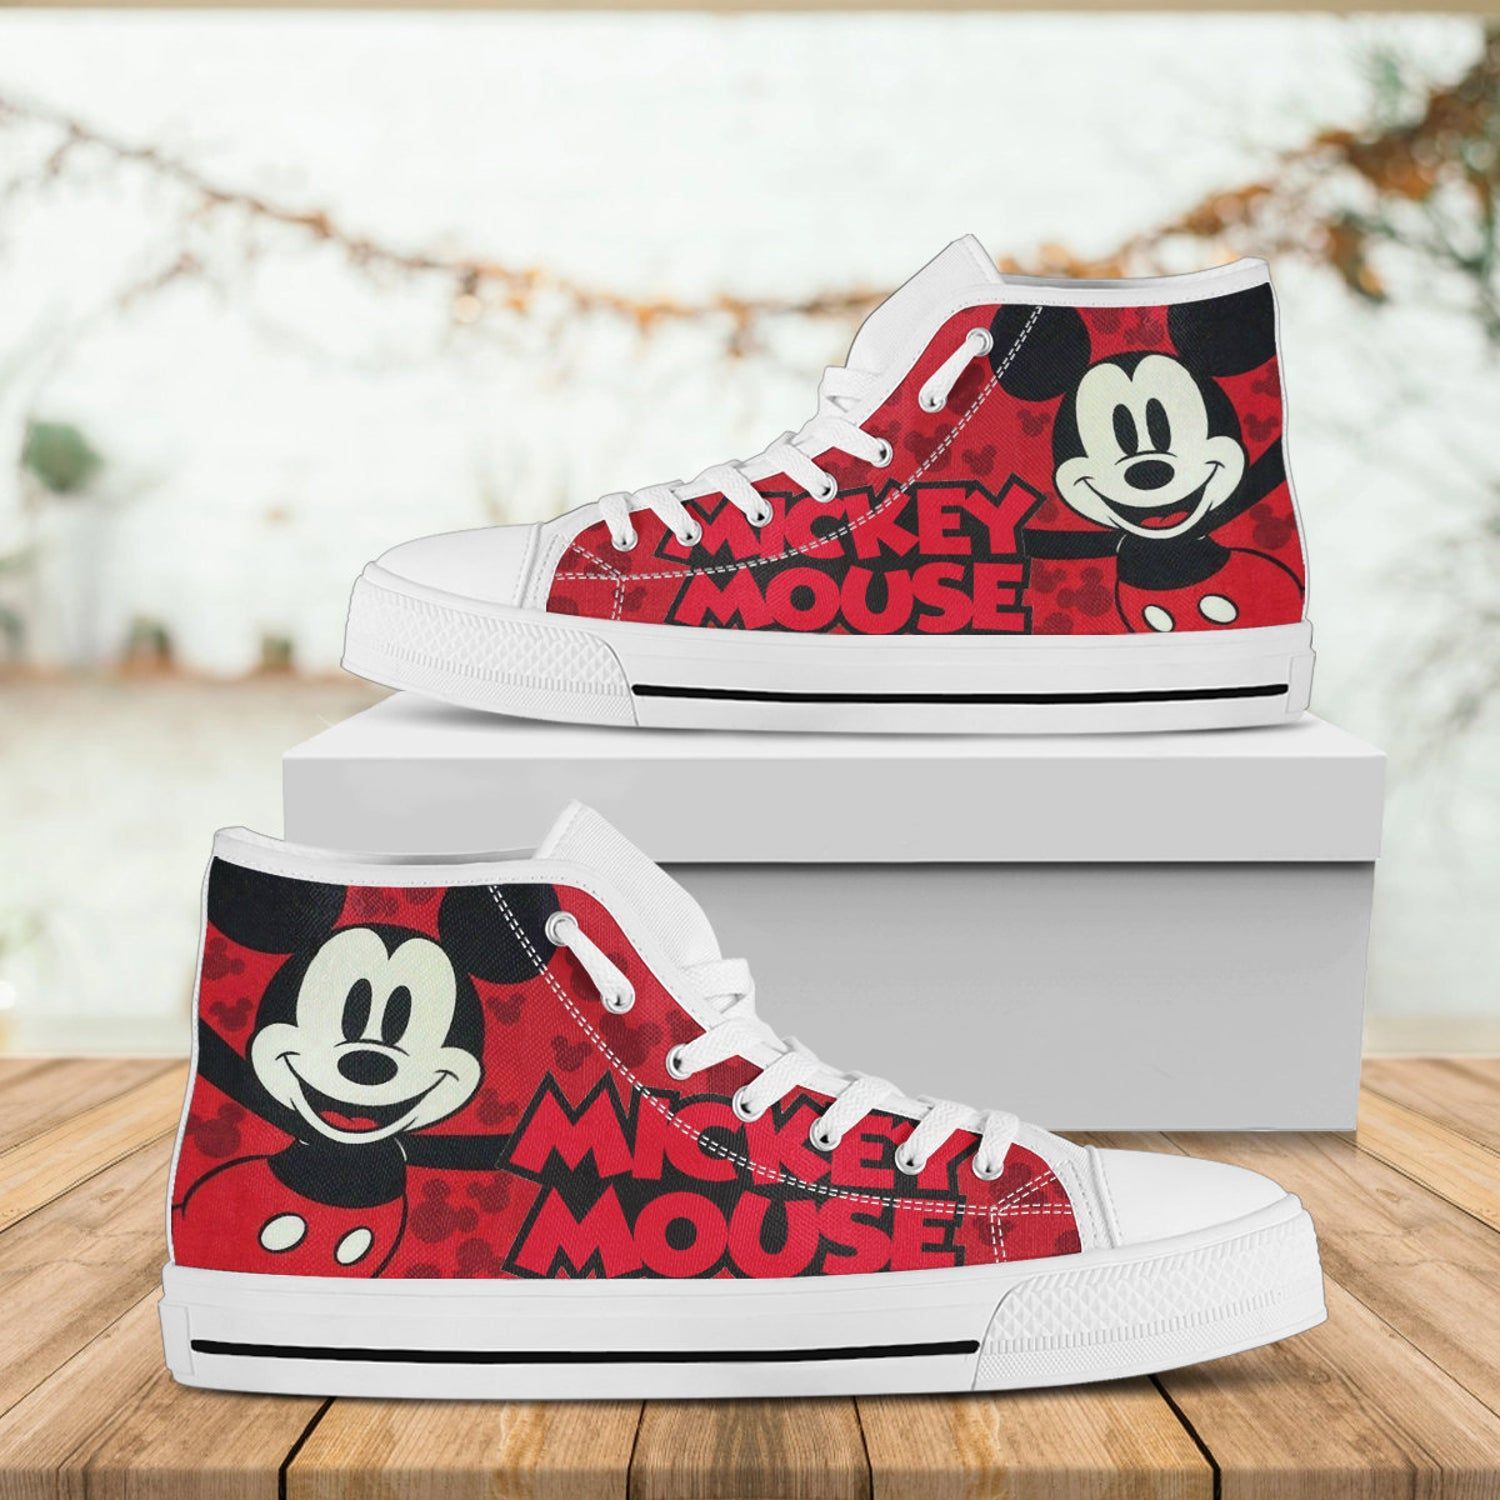 Houston American Football Team High Top Texans Baby Yoda Star Wars High Top Canvas Shoes Running Shoes Sport Shoes Unisex Shoes